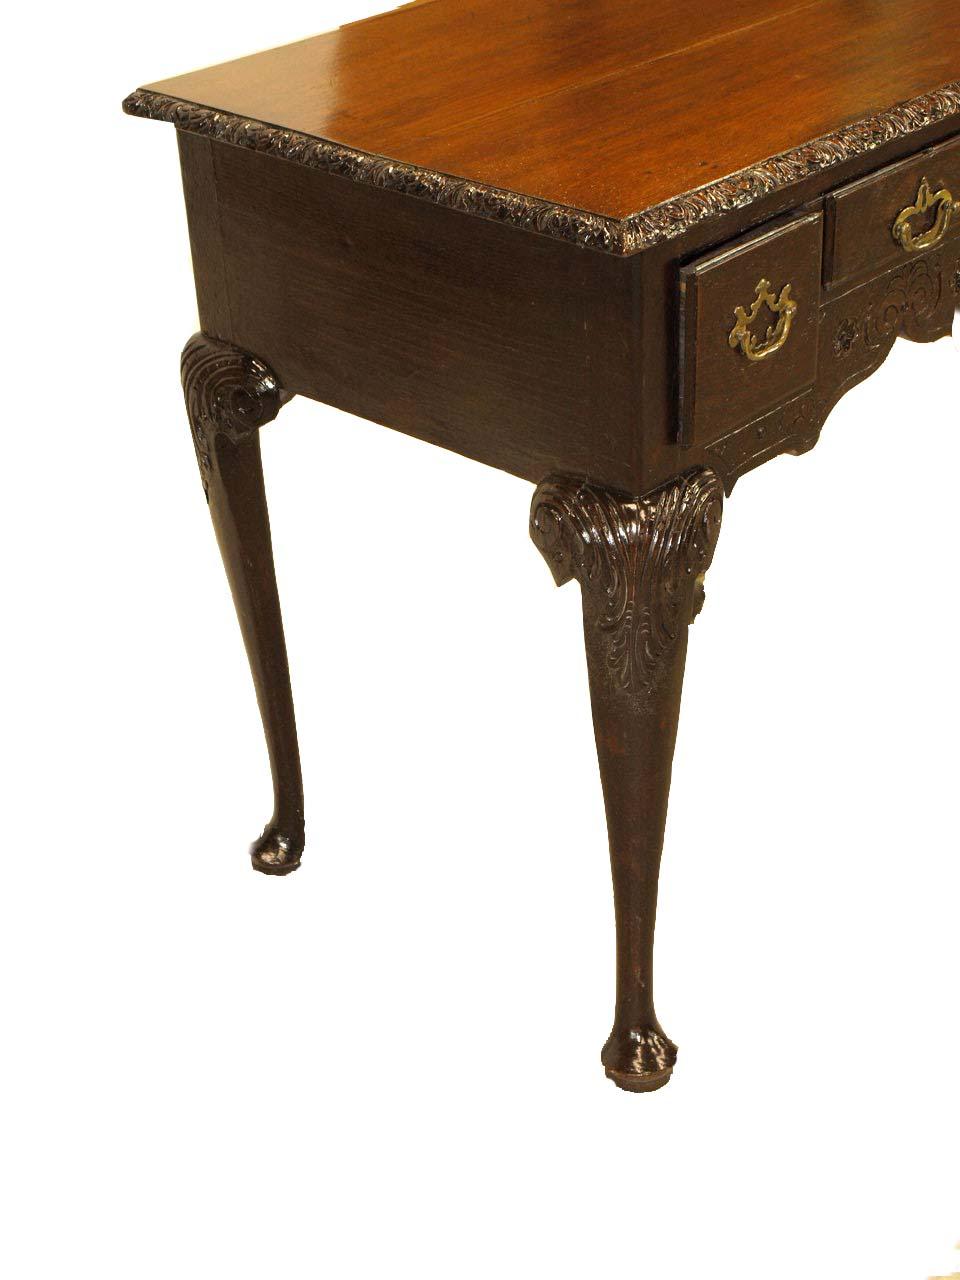 Carved oak Chippendale style lowboy, nicely faded top with carved molding, the three drawers with overlapping beaded edges and open work original pulls. The apron features carved rosettes and foliate. All four cabriole legs with highly carved knees